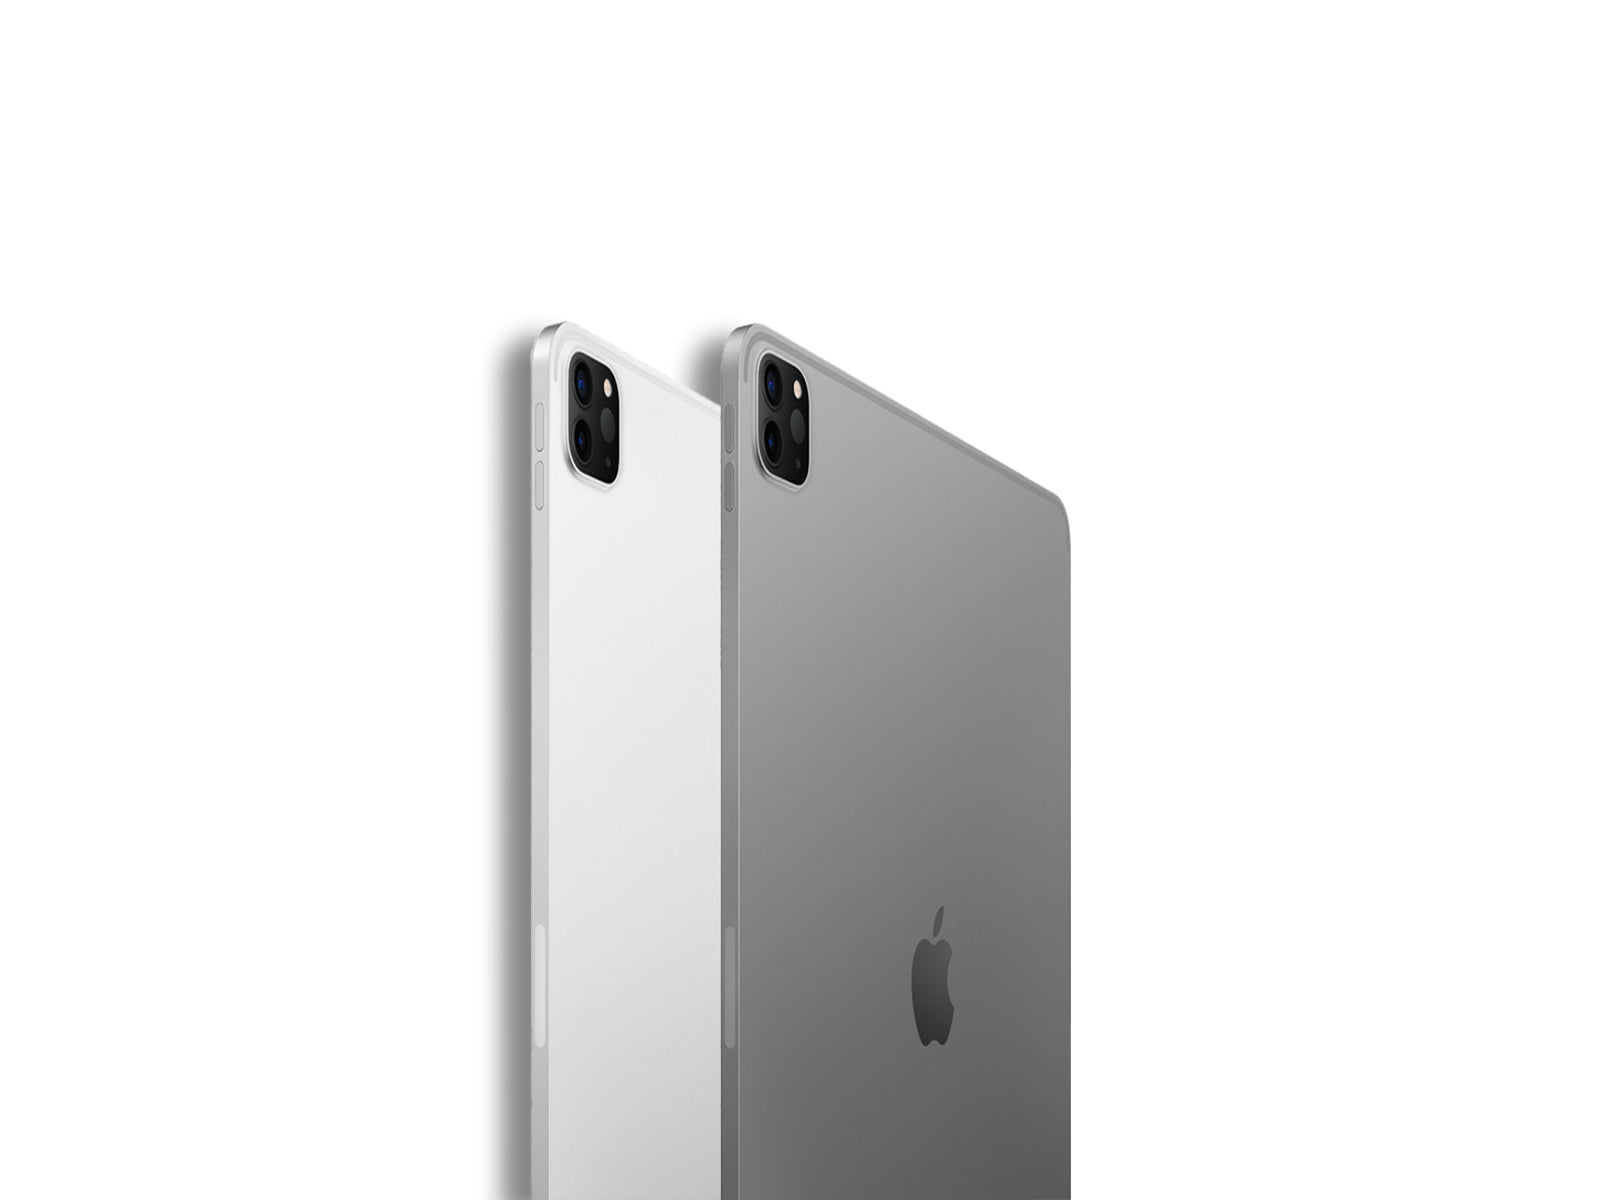 iPad Pro 4th Gen 11 Inch In Silver And Space Grey Back